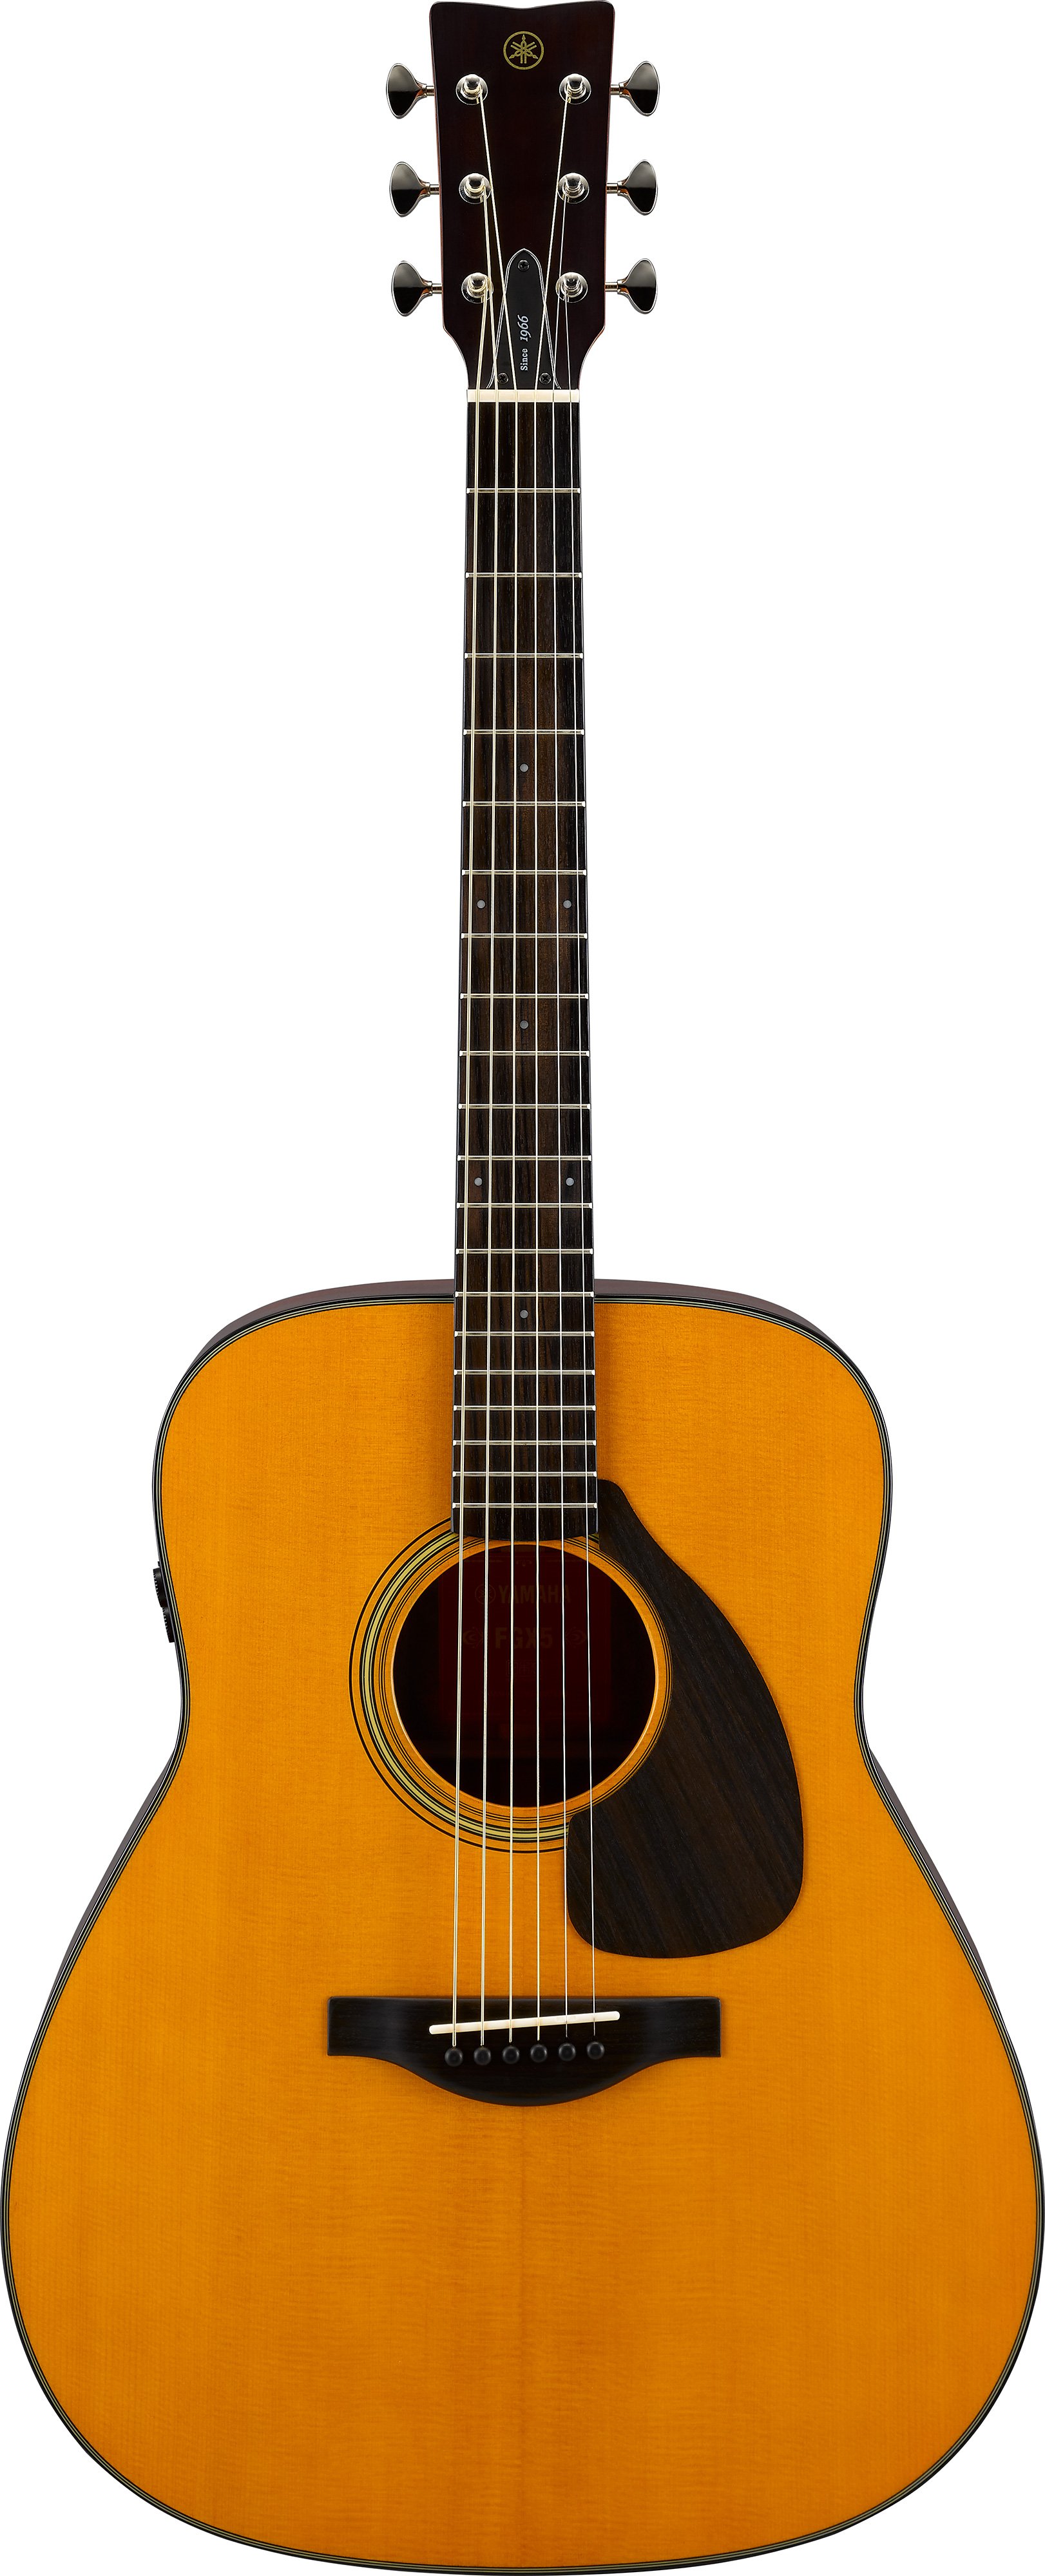 Støvet hund Frost FG/FS Red Label - Overview - FG Series - Acoustic Guitars - Guitars, Basses  & Amps - Musical Instruments - Products - Yamaha USA